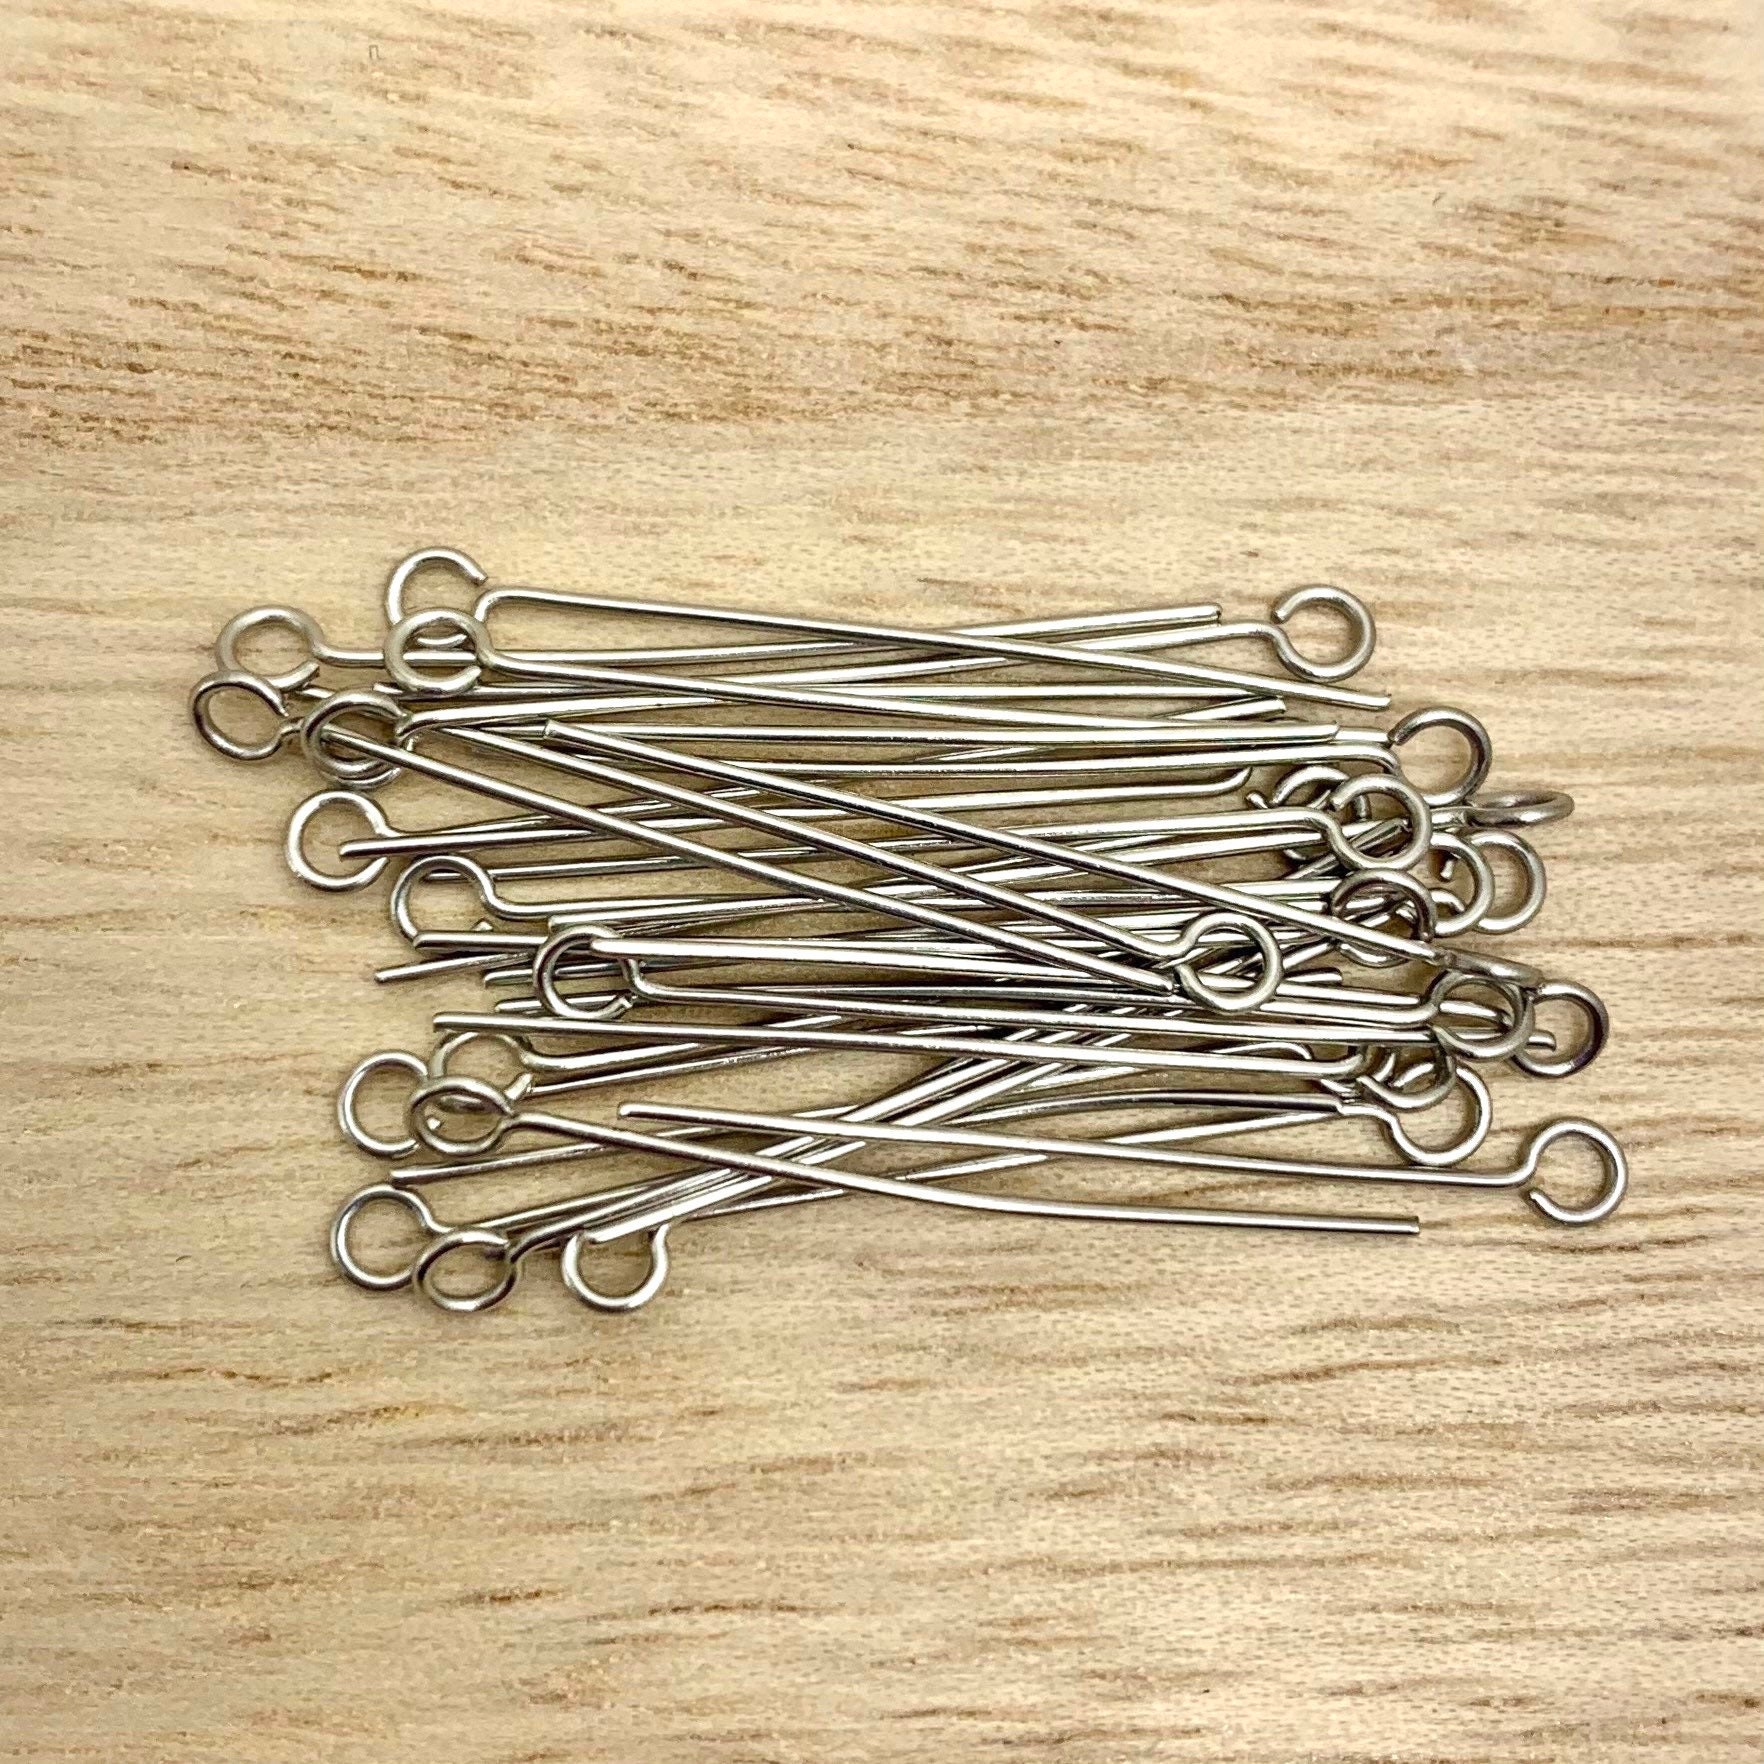 50mm Jewelry Pins, Flat Head, Ball Head and Eye Pins, Stainless